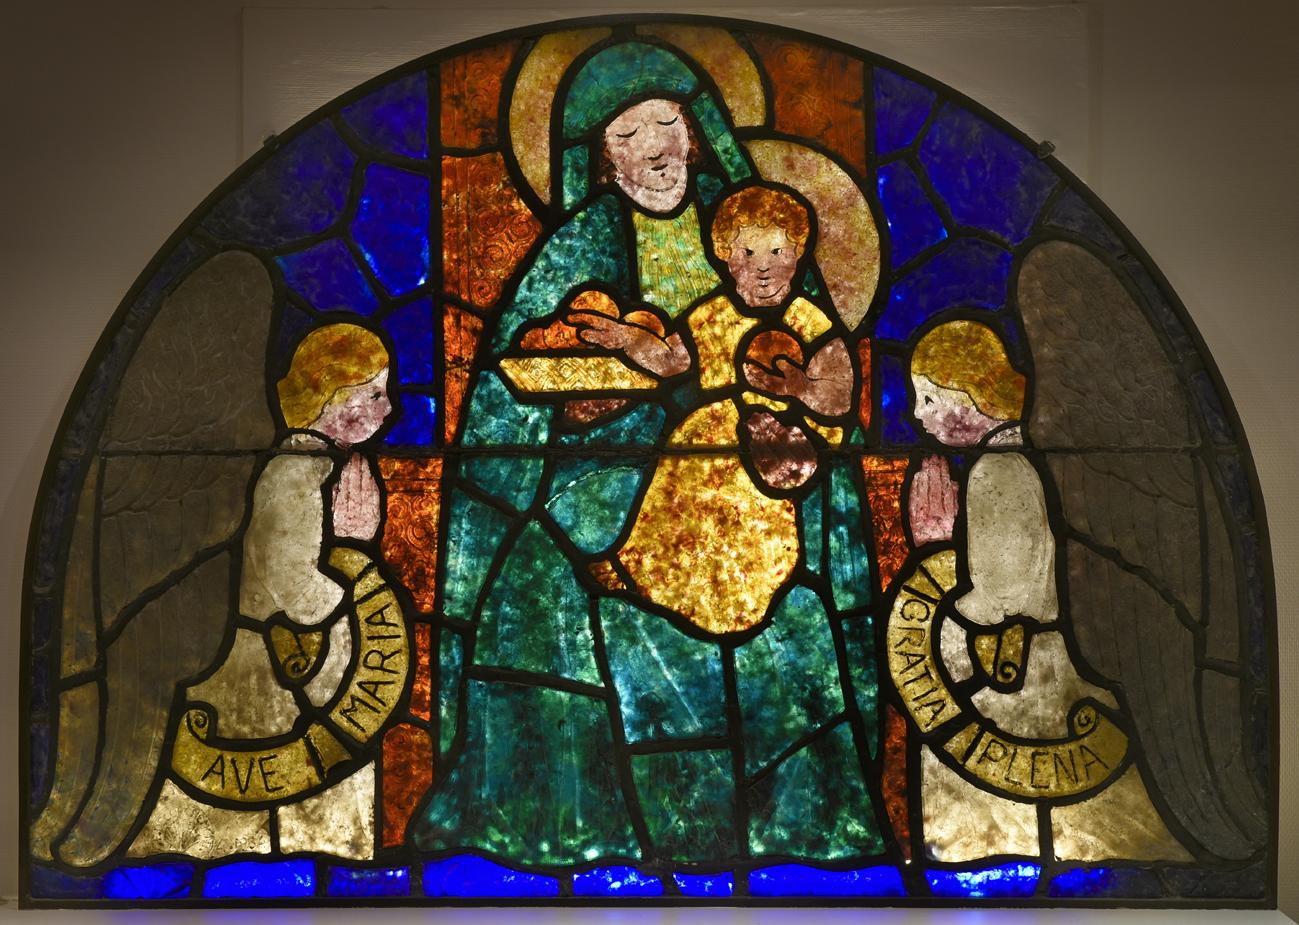 Stained-glass window - Art by François-Emile Decorchemont